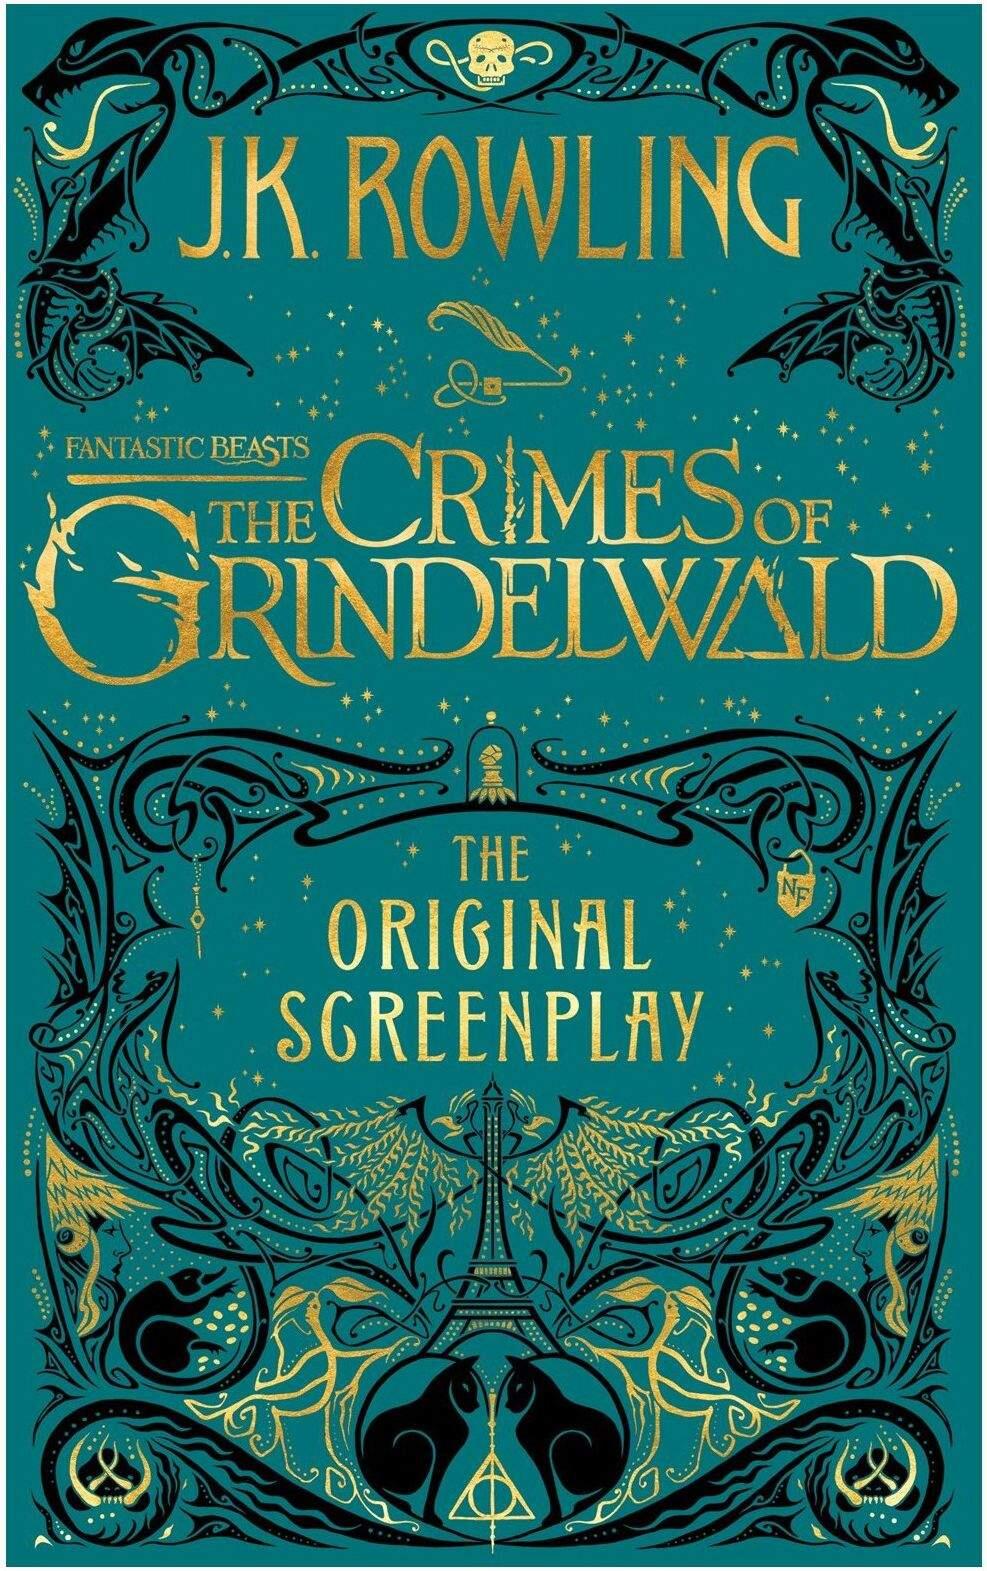 MAGIC SHOW: The screenplay of the new movie is No. 8 on the local bestsellers' list.